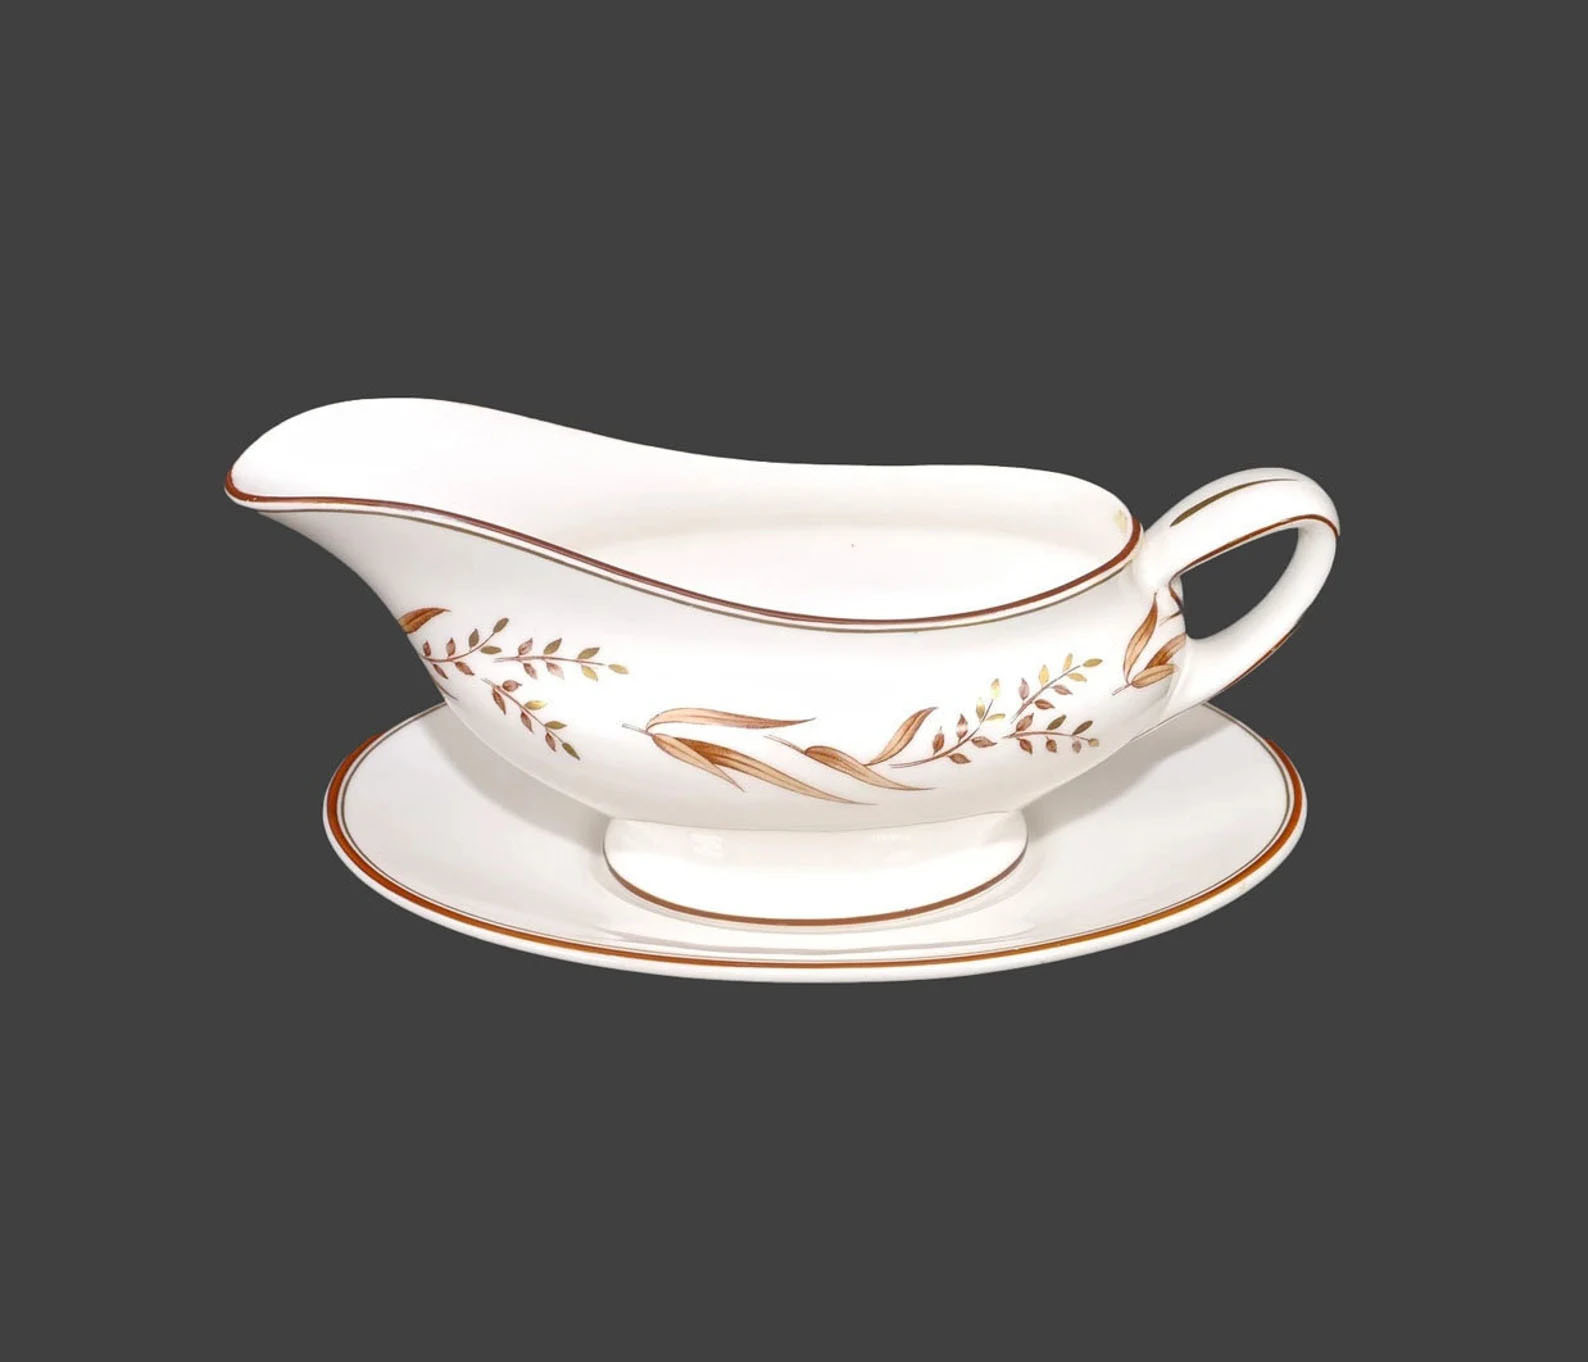 Royal Doulton Autumn Breezes H4932 gravy boat with under-plate made in England. - $106.25